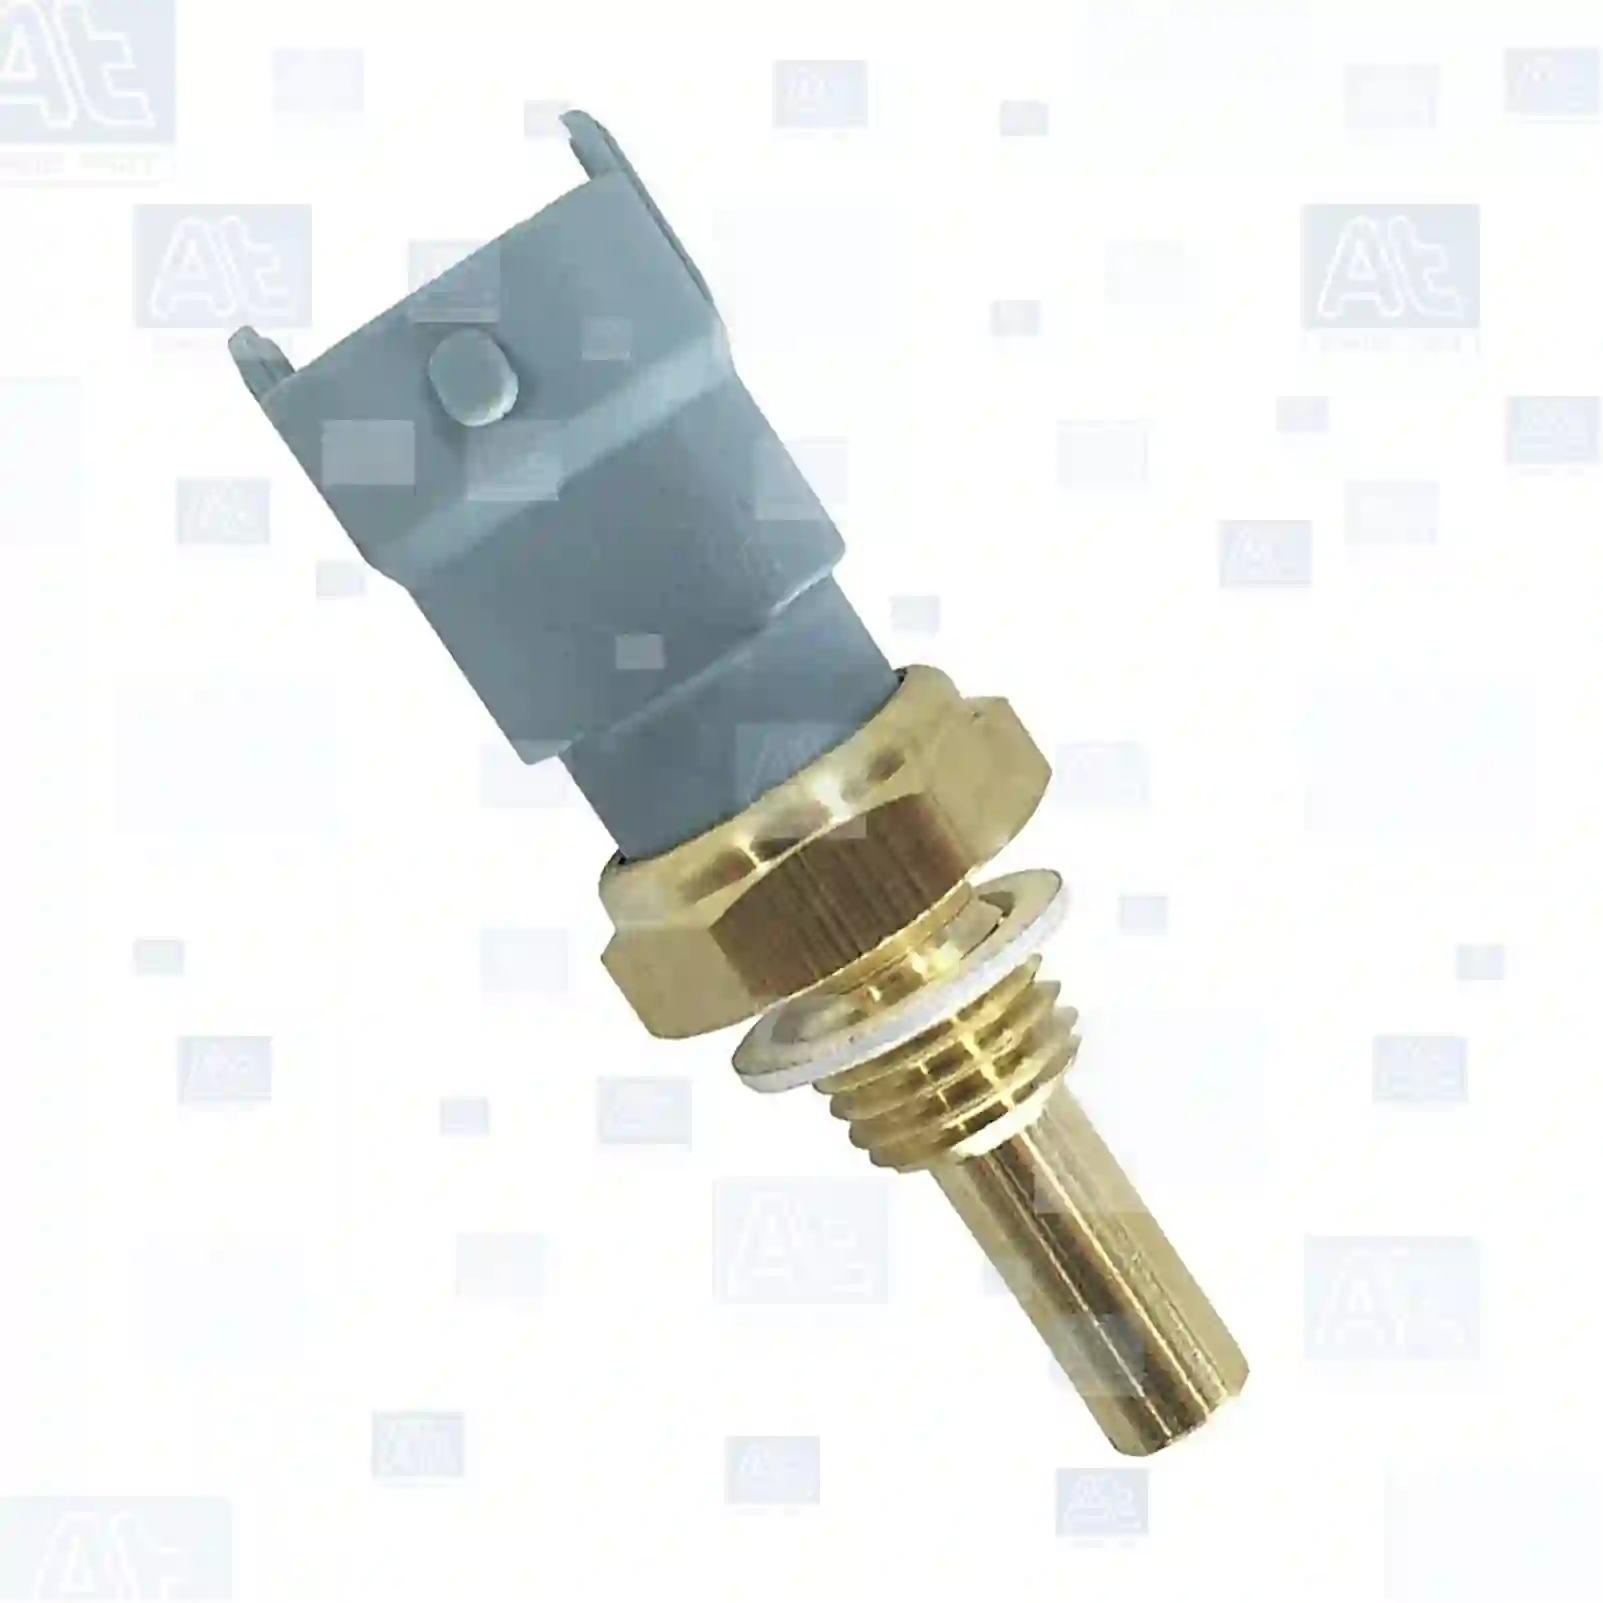 Sensors Temperature sensor, at no: 77711383 ,  oem no:46462179, 46469865, 46472179, 500382599, 55187822, 60814175, 60814715, 71739856, 71741090, 99455420, 27712011, 360216055D, 3Z0963535, 12566778, 500382599, 82017881, 12566778, 12639899, 15393755, 24436779, 25183414, 55566146, 90541520, 90541937, 90542063, 90570185, 90570382, 91298691, 9193163, 9198691, 93174208, 93342219, 96868950, 97227219, 45962053F, 5066779AA, 00001338C7, 1338C7, 1338F9, 5010412450, 612630060035, 46472179, 500382599, 60814715, 71739856, 99455420, 07762299, 46462179, 46469865, 46472179, 500382599, 55187822, 60814175, 60814715, 71738956, 71739856, 71741090, 8972272190, 12566778, 12639899, 1338467, 1338511, 15336564, 15393755, 16240843, 25183414, 55566146, 55599958, 6235605, 6238179, 6238266, 6238422, 6238935, 6338486, 90490185, 90541520, 90541937, 90542063, 90570185, 90570382, 91298691, 9177213, 9193163, 9198691, 93174208, 93342219, 9542861, 9543406, 96868950, 97227219, 12628120, 90541937, 90541937, 37870-PLZ-D00, 37870-RBD-E01, 37870-RBD-E011, 37870-RDB-E01, 37870RBDE011M4, 8-97227219-0, 46469865, 46472179, 500382599, 5010412450, 60814715, 71739856, 5066779AA, 004510411110119088, 201149034, 04199809, 04213839, 46469865, 46472179, 500382599, 55187822, 60814175, 60814715, 71739856, 71741090, 99455420, 80891090, 03090C0071N, 961200690034, 82017881, 1338179, 1338357, 1338461, 1338467, 1338511, 1342567, 4660585, 4772307, 4773586, 4801922, 4818227, 6235605, 6238179, 6238266, 6238486, 6238935, 6338486, 00001338C7, 1338C7, 1338F9, 5001848546, 5010412450, 7020513340, 7420513340, 7421531072, 7485137860, 3Z0963535, PB107265PA, 12566778, 12639899, 15393755, 15398755, 24436779, 4660585, 4772208, 4772307, 4773586, 5341391, 55566146, 5959283, 90541937, 90542063, 90570185, 9177213, 9198691, 9542861, 9543406, 270990430, 90541937, 13650-78J00, 13650-78J00-000, 500382599, 20513340, 20153340, 20513340, 21531072, 93342220, 2R0919501B, 148661913003, 52767791110, ZG21107-0008 At Spare Part | Engine, Accelerator Pedal, Camshaft, Connecting Rod, Crankcase, Crankshaft, Cylinder Head, Engine Suspension Mountings, Exhaust Manifold, Exhaust Gas Recirculation, Filter Kits, Flywheel Housing, General Overhaul Kits, Engine, Intake Manifold, Oil Cleaner, Oil Cooler, Oil Filter, Oil Pump, Oil Sump, Piston & Liner, Sensor & Switch, Timing Case, Turbocharger, Cooling System, Belt Tensioner, Coolant Filter, Coolant Pipe, Corrosion Prevention Agent, Drive, Expansion Tank, Fan, Intercooler, Monitors & Gauges, Radiator, Thermostat, V-Belt / Timing belt, Water Pump, Fuel System, Electronical Injector Unit, Feed Pump, Fuel Filter, cpl., Fuel Gauge Sender,  Fuel Line, Fuel Pump, Fuel Tank, Injection Line Kit, Injection Pump, Exhaust System, Clutch & Pedal, Gearbox, Propeller Shaft, Axles, Brake System, Hubs & Wheels, Suspension, Leaf Spring, Universal Parts / Accessories, Steering, Electrical System, Cabin